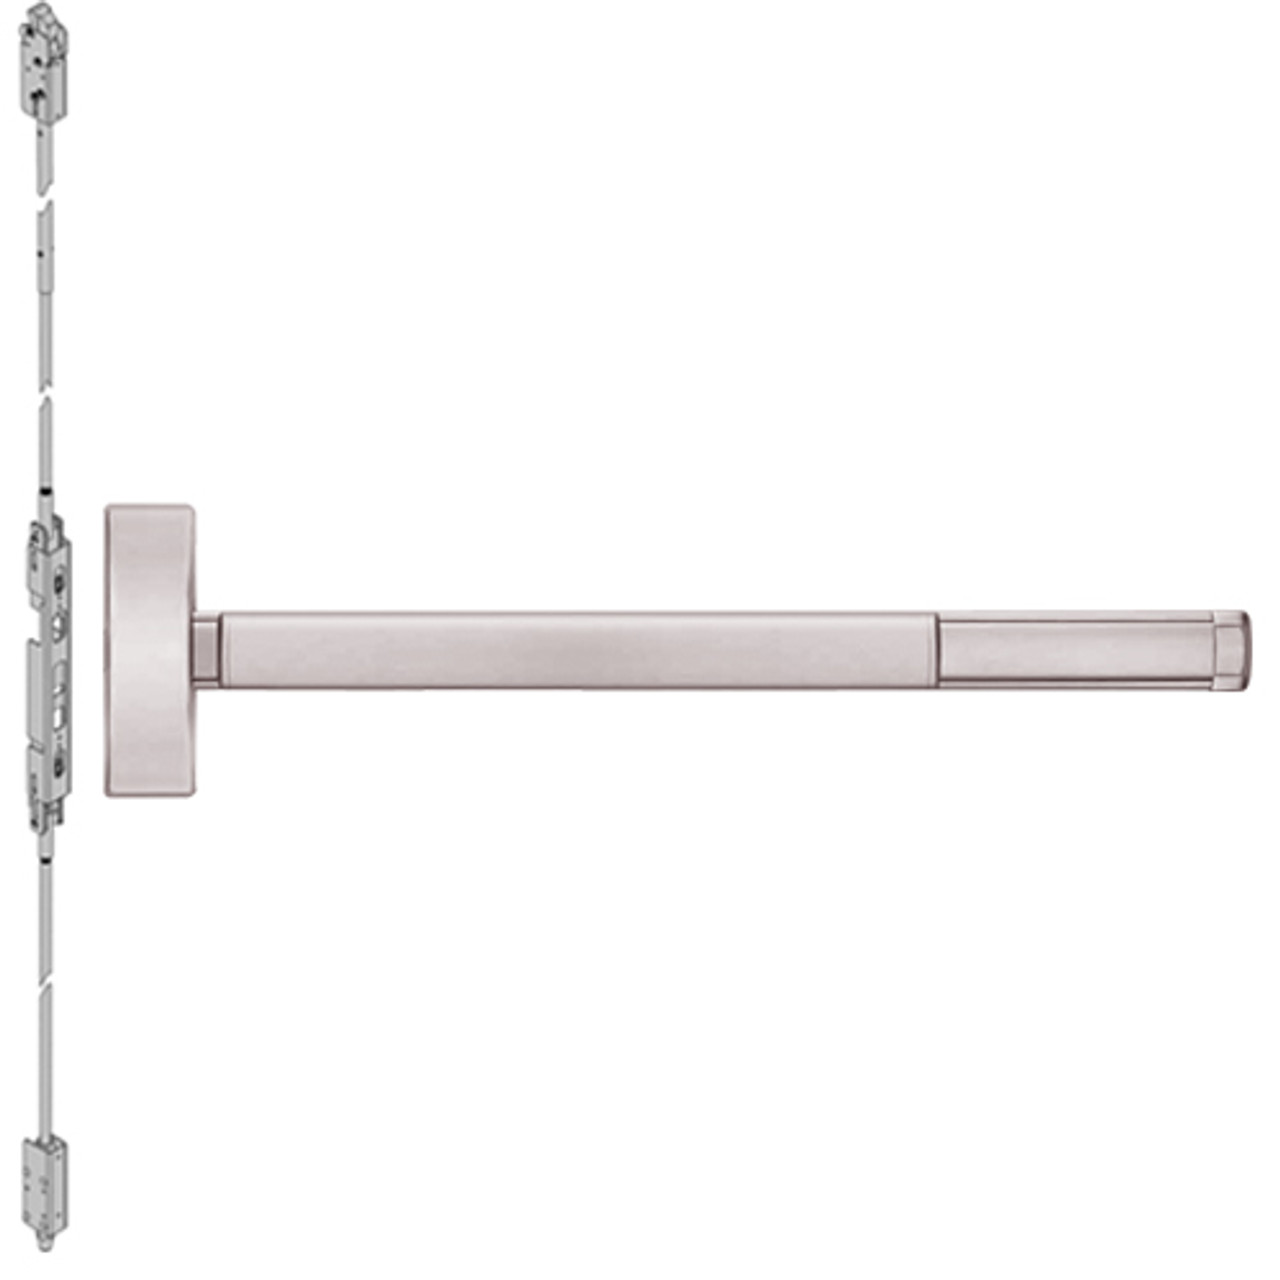 TS2815-628-48 PHI 2800 Series Concealed Vertical Rod Exit Device with Touchbar Monitoring Switch Prepped for Thumbpiece Always Active in Satin Aluminum Finish